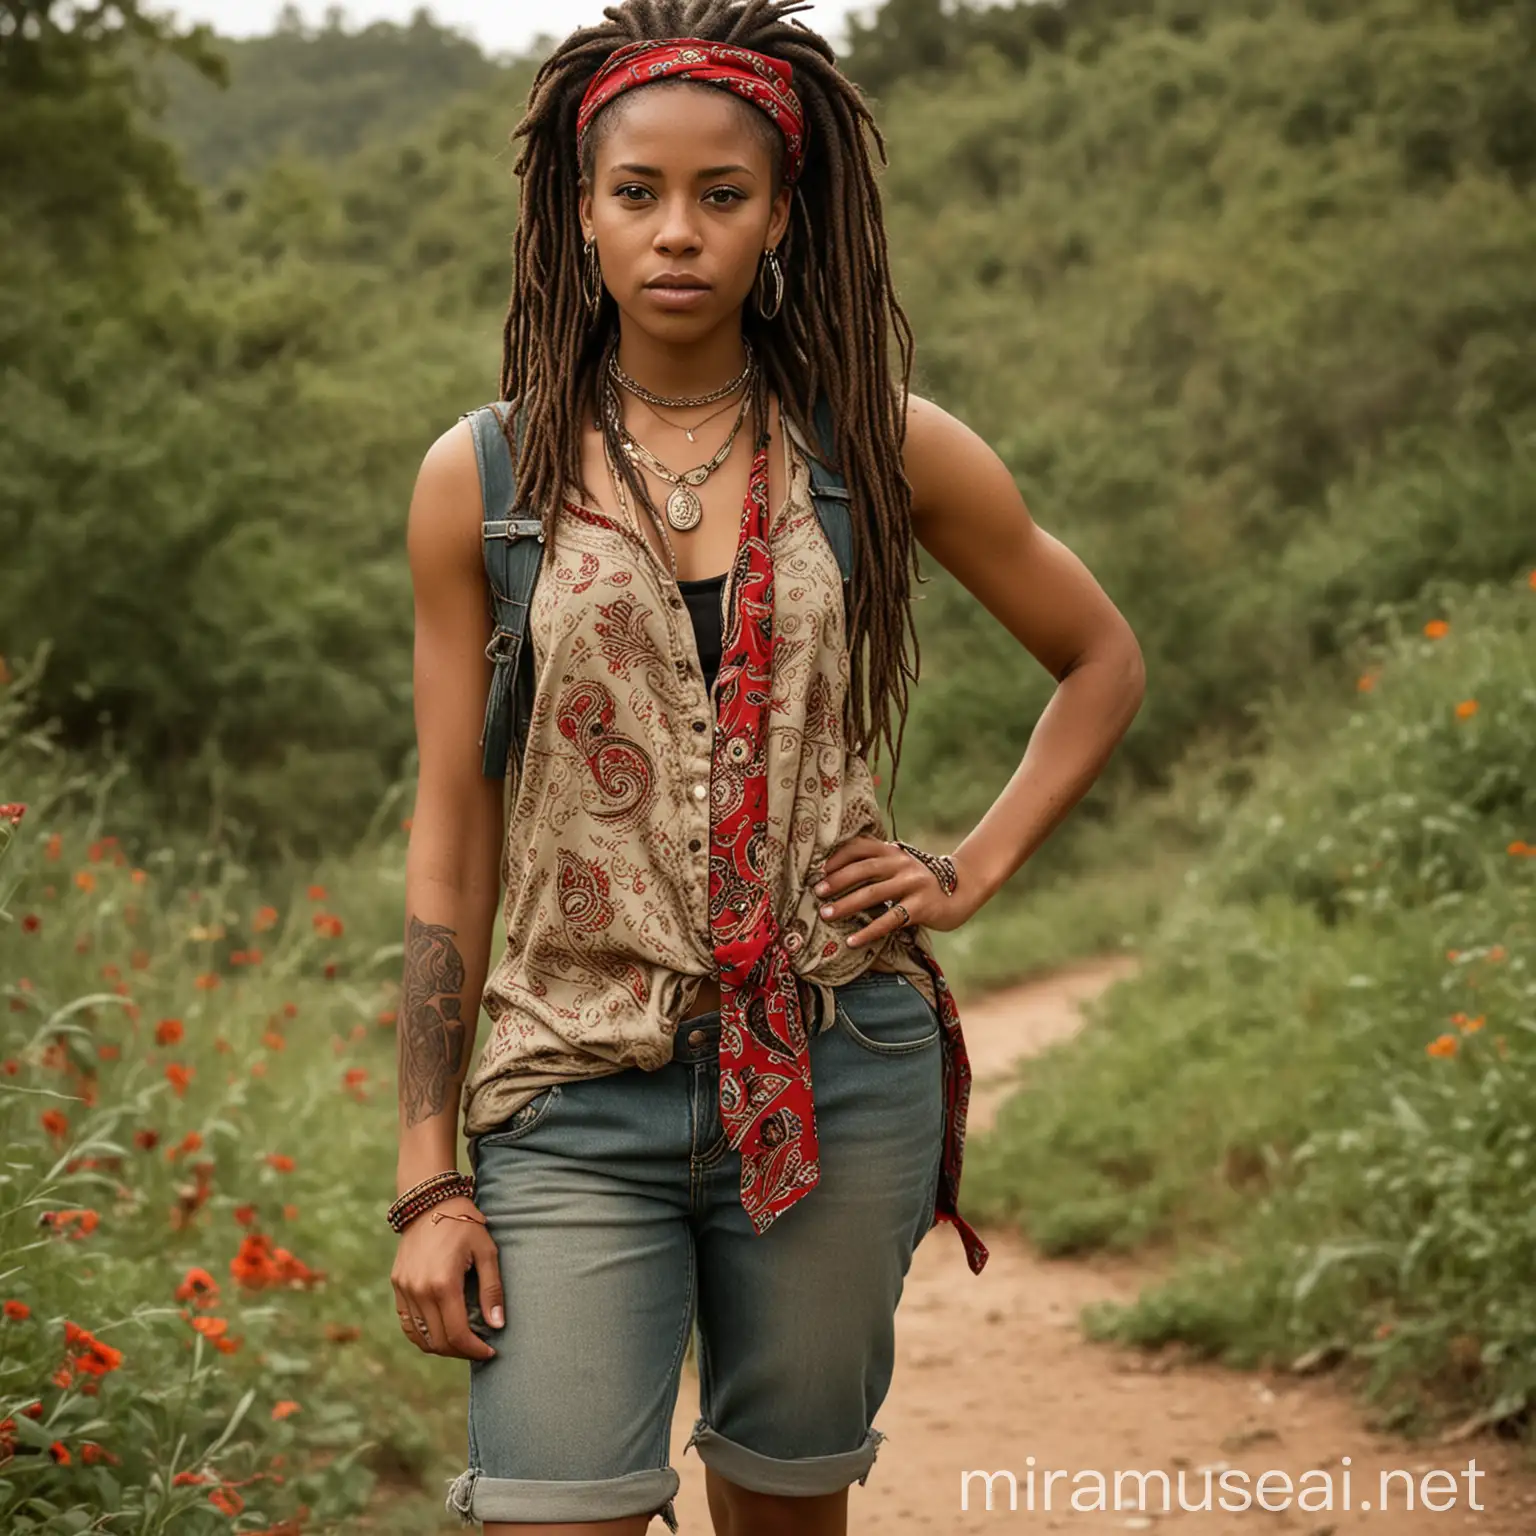 A African woman, 29-years old,  had a long dreadlock brown hair, with a scarlet satin paisley flowers print headband. Has a muscular body, dark eyes and tattoos on arms. She wore a khaki tie front sleeveless shirt, denim shorts with sheath on her waist, hiking leather boots, and a golden necklace. She carries an determination and distrustful aura.